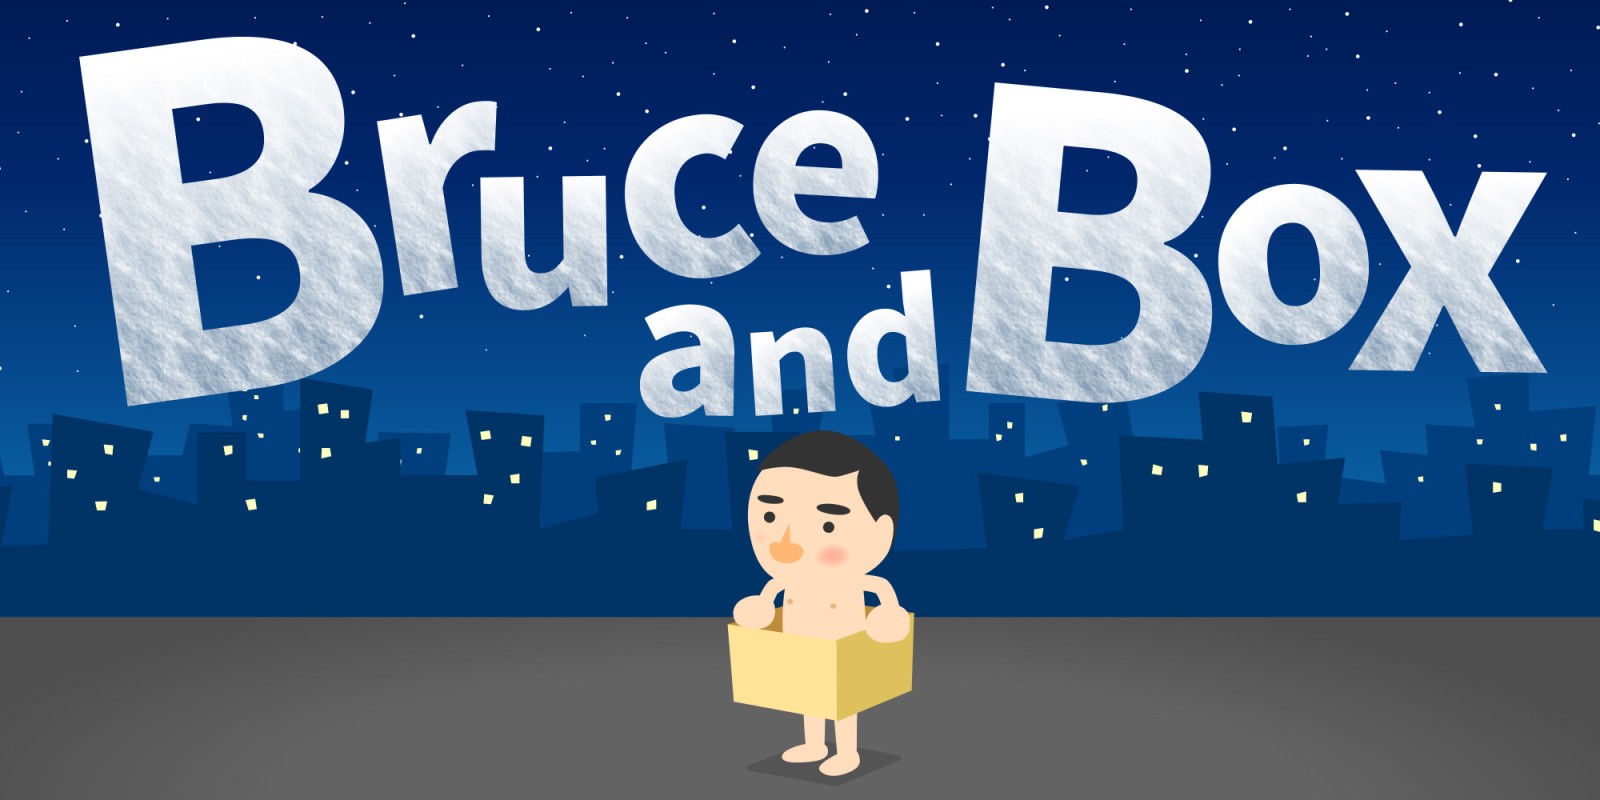 Bruce and Box